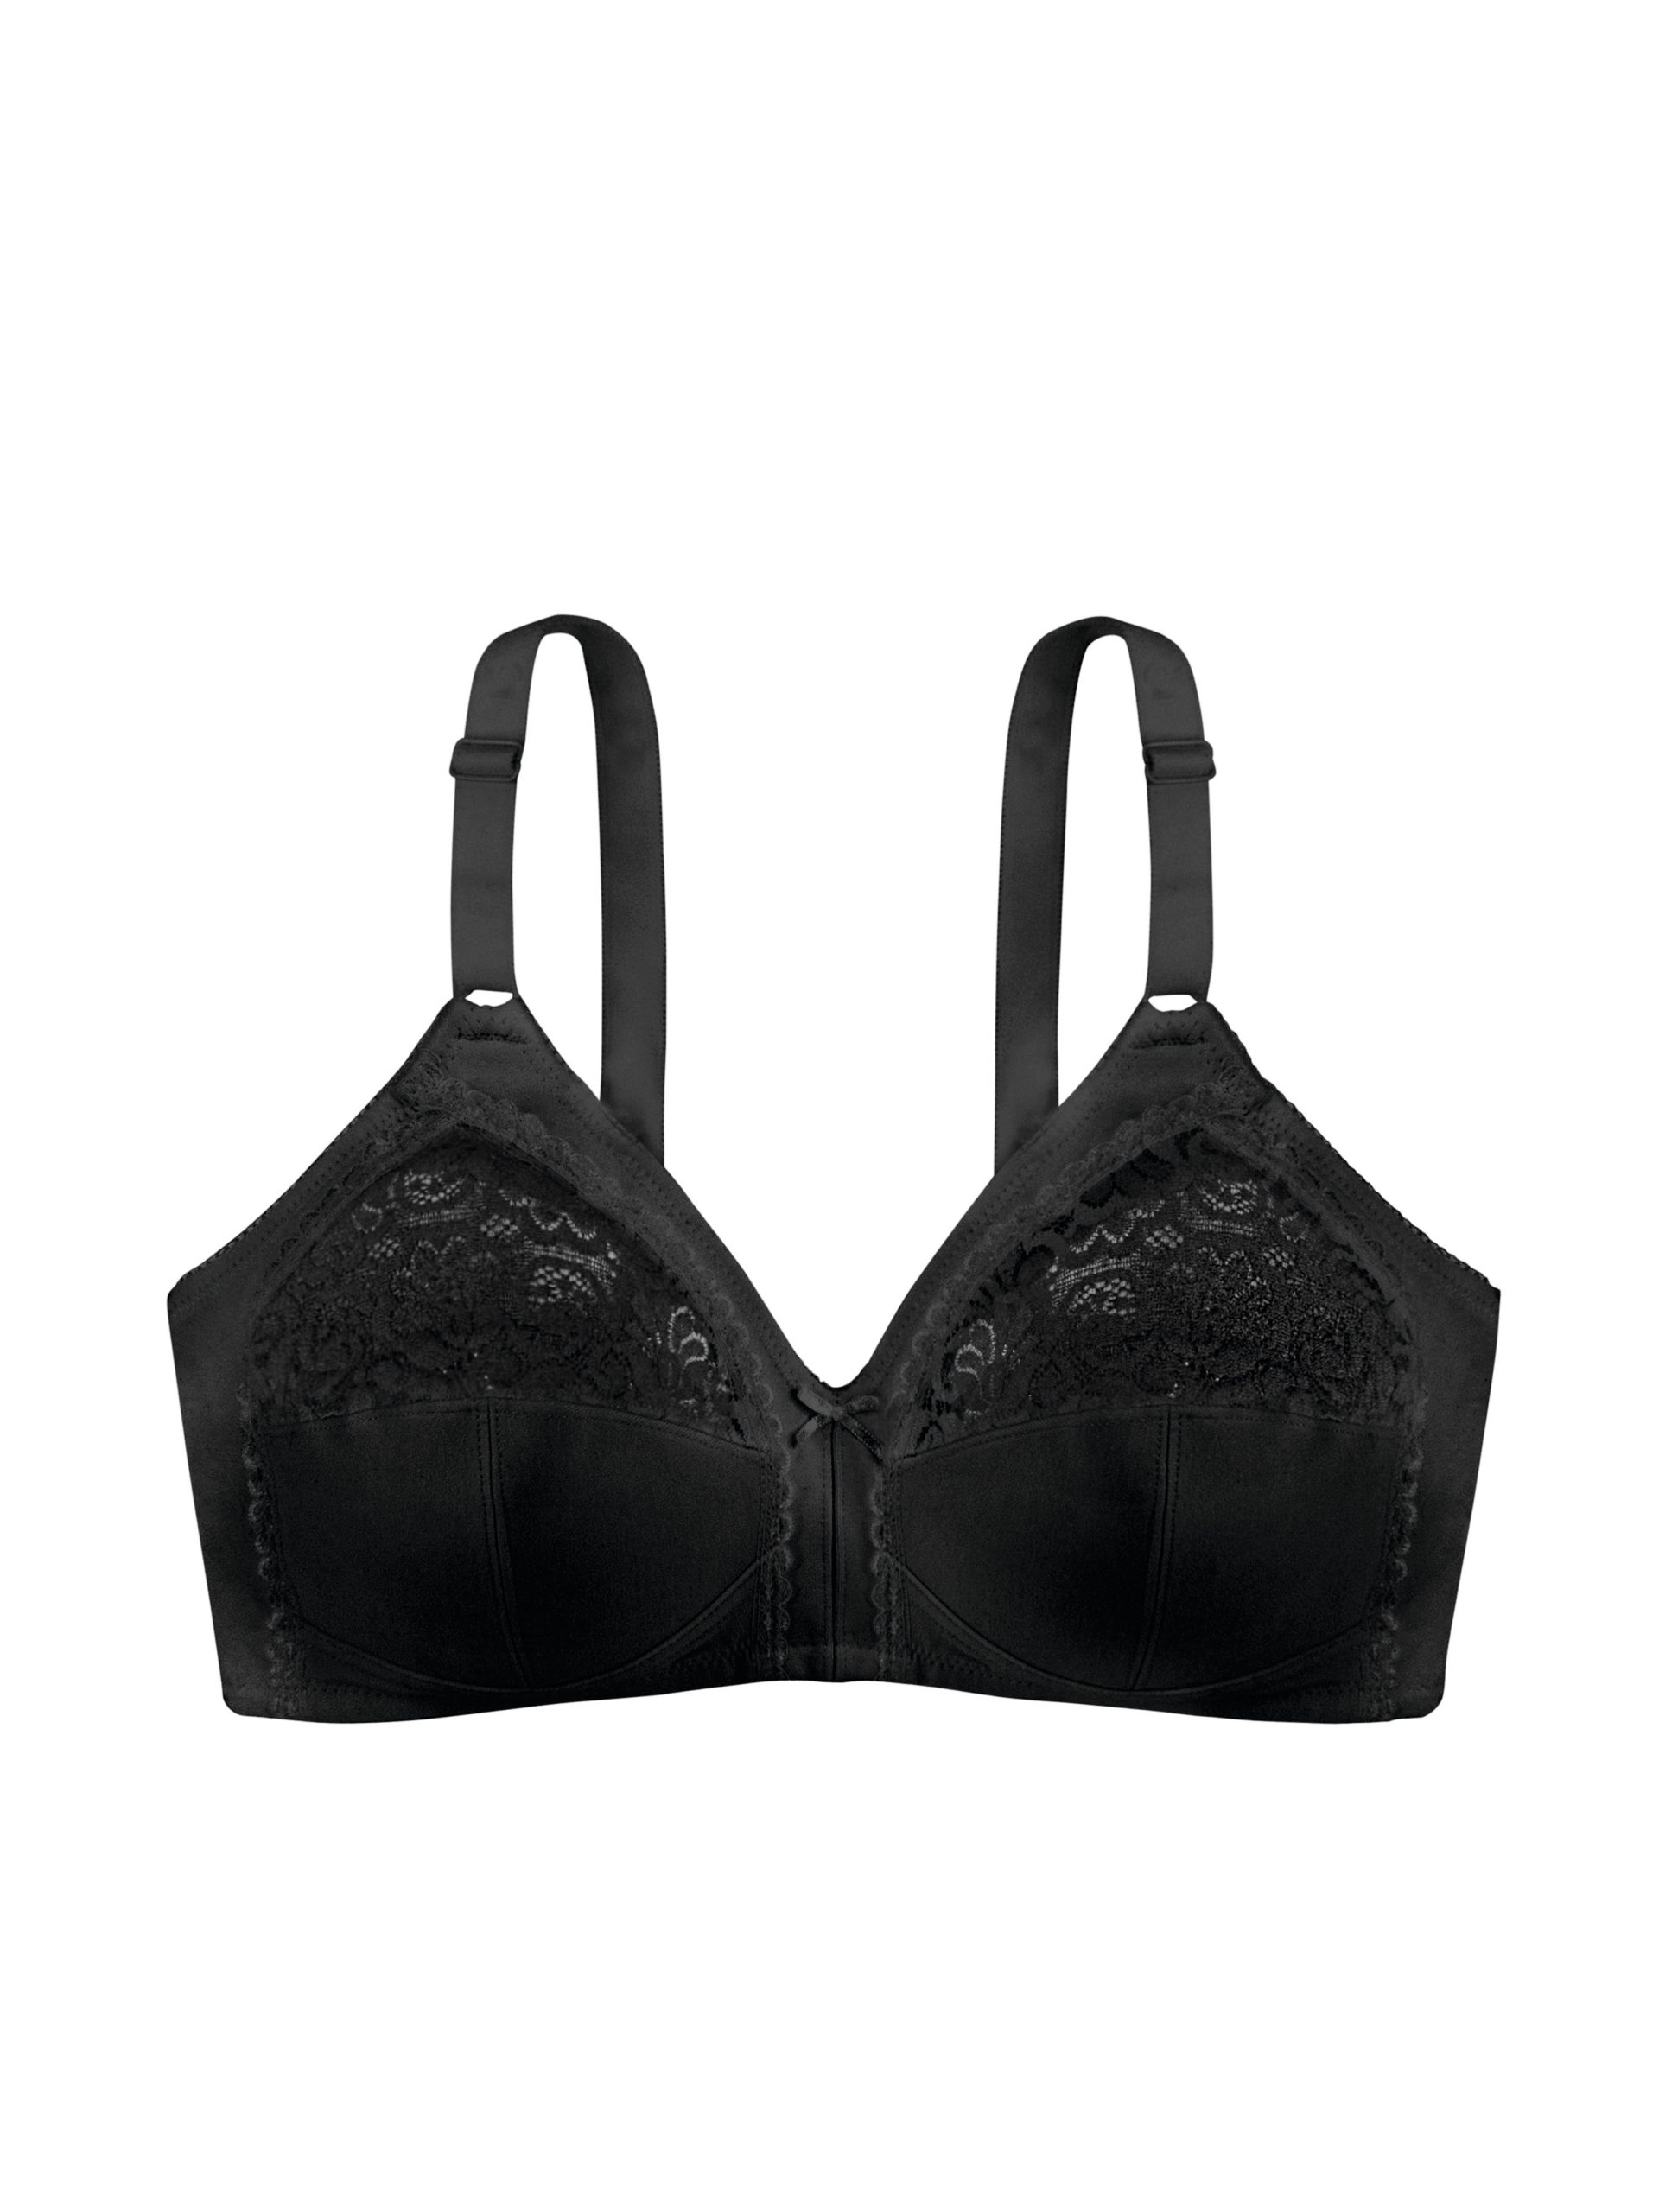 packx2 bralettes, non wired, non padded, mia, dorina. limited edition